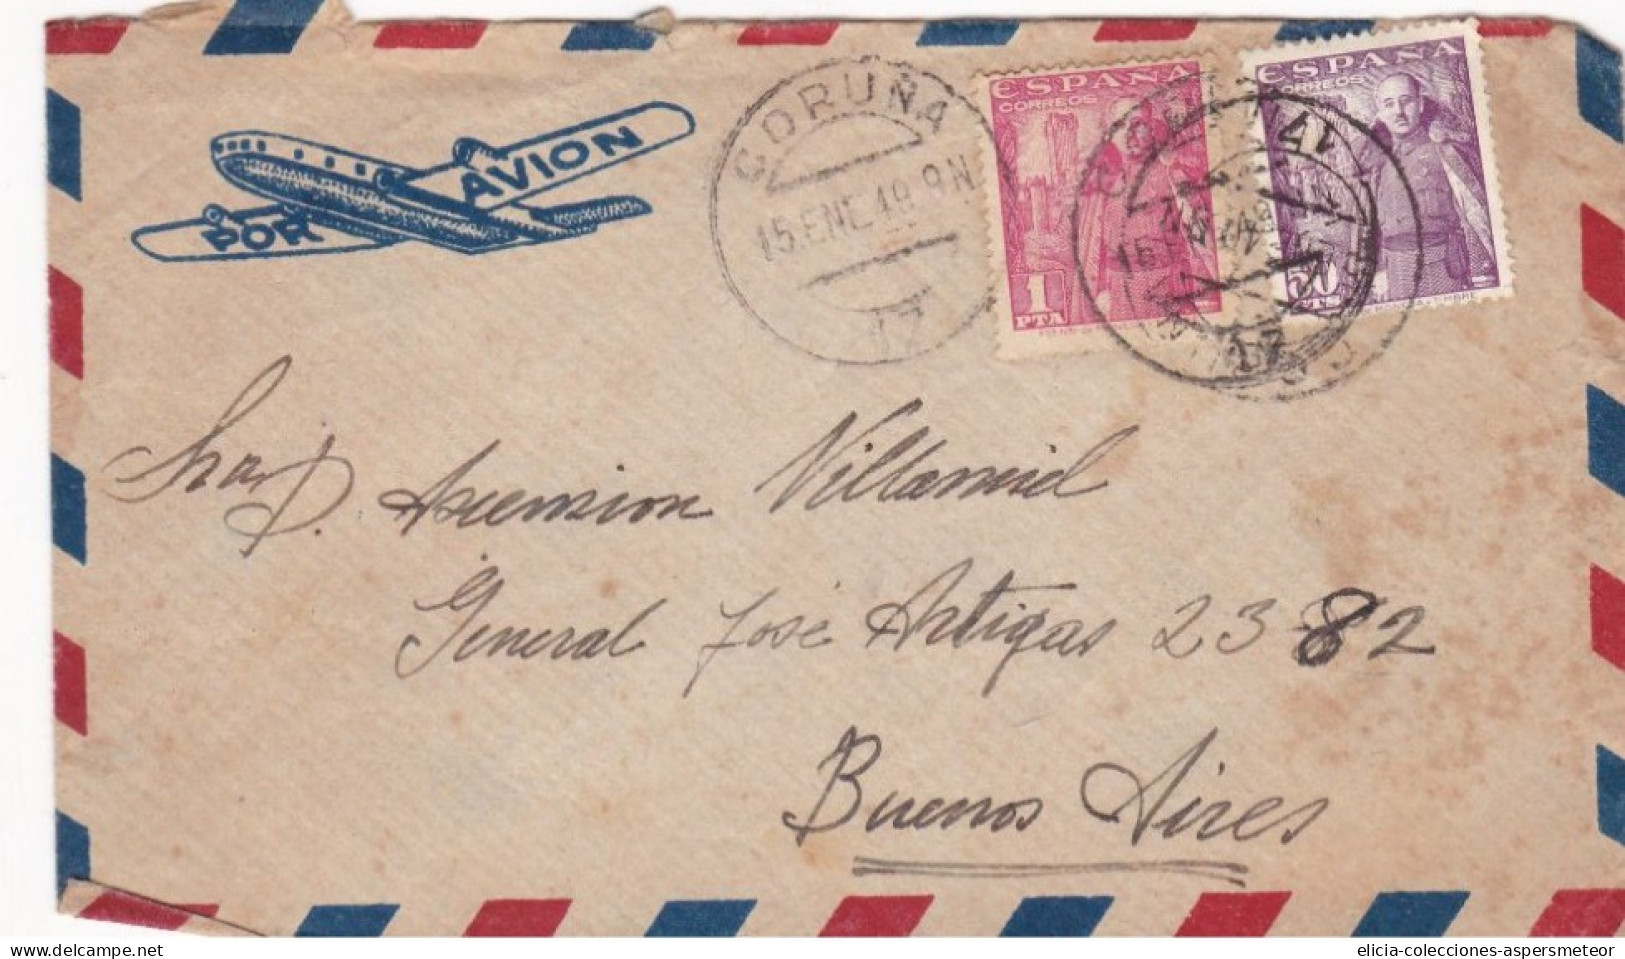 Spain - 1949 - Airmail - Letter - Sent From La Coruña To Buenos Aires, Argentina - Caja 30 - Covers & Documents